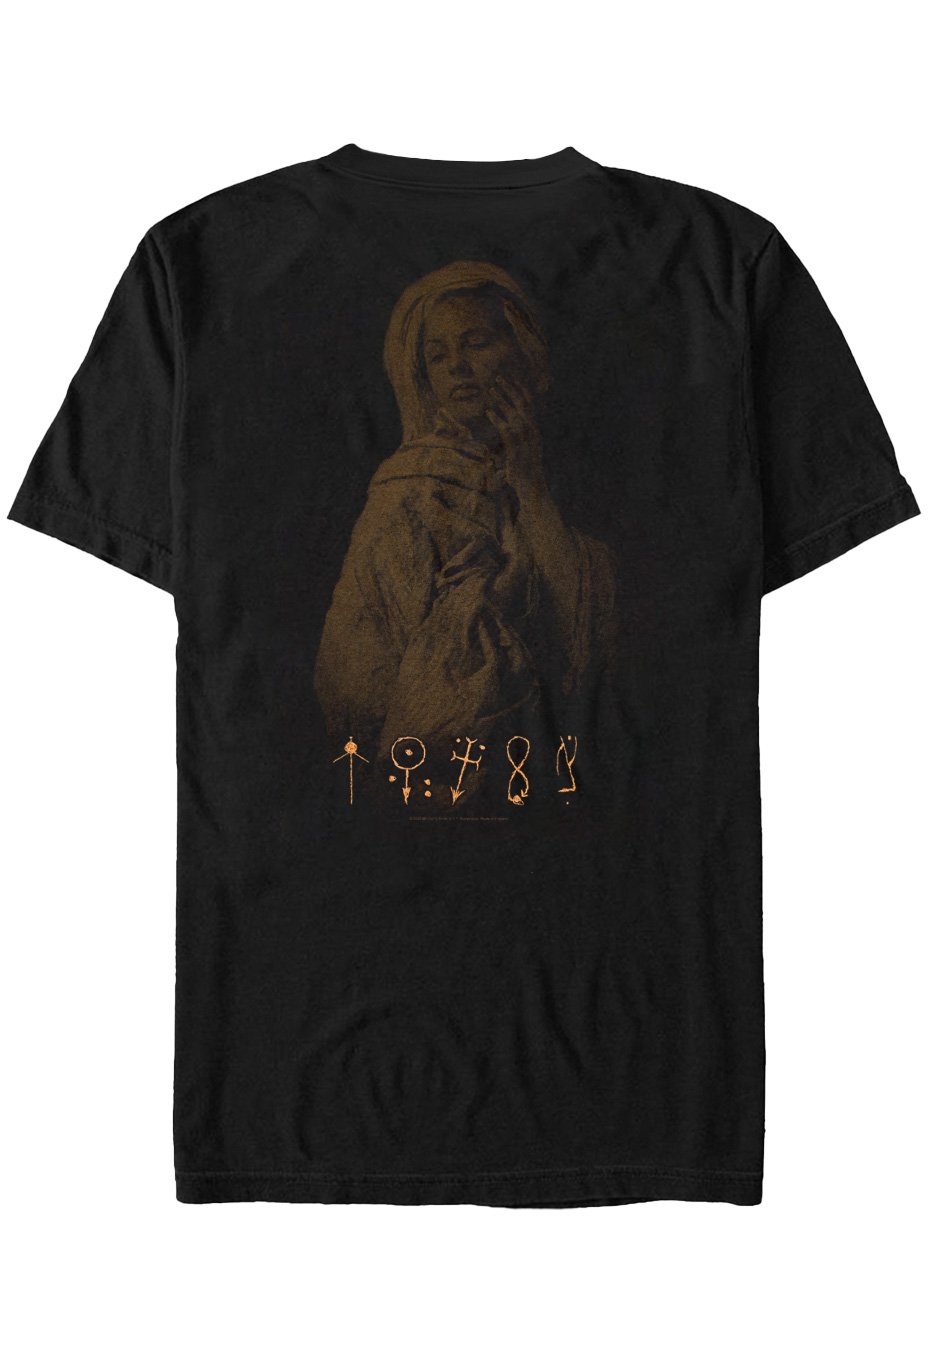 My Dying Bride - The Ghost Of Orion Skull - T-Shirt